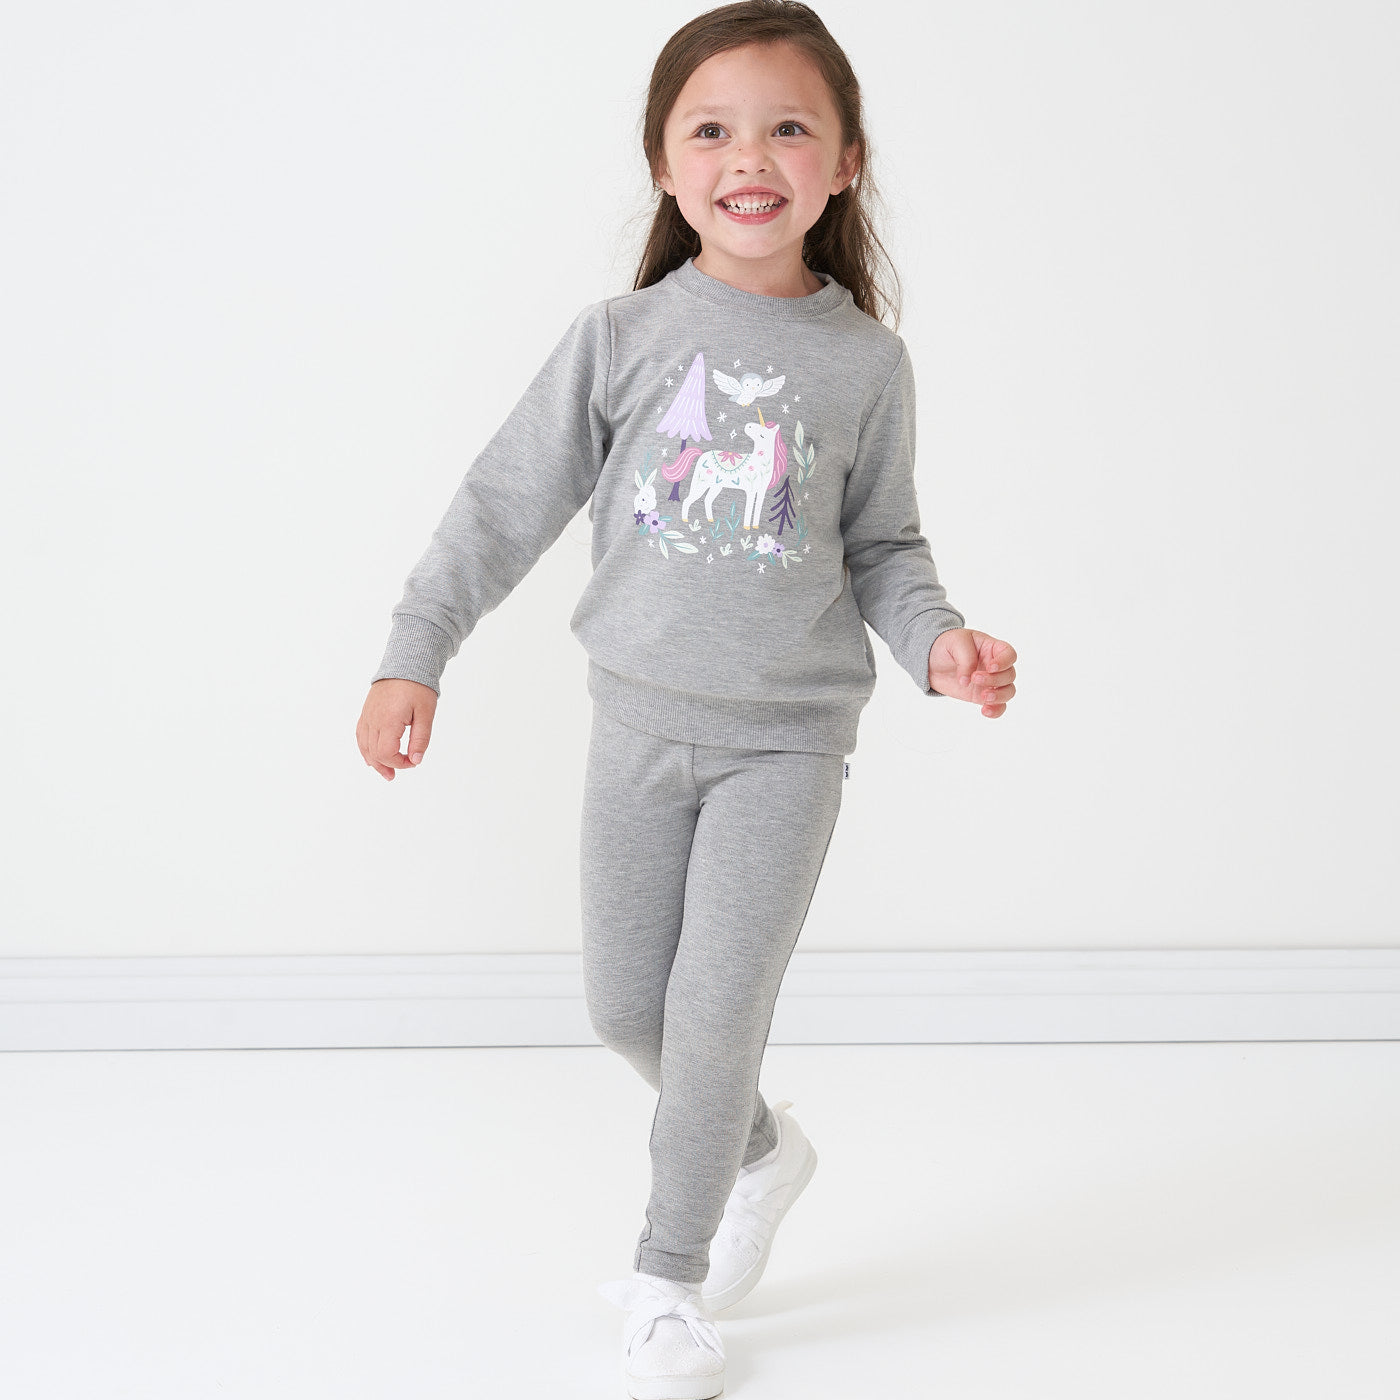 Alternate image of a child wearing a Unicorn crewneck sweatshirt paired with Heather Gray cozy leggings